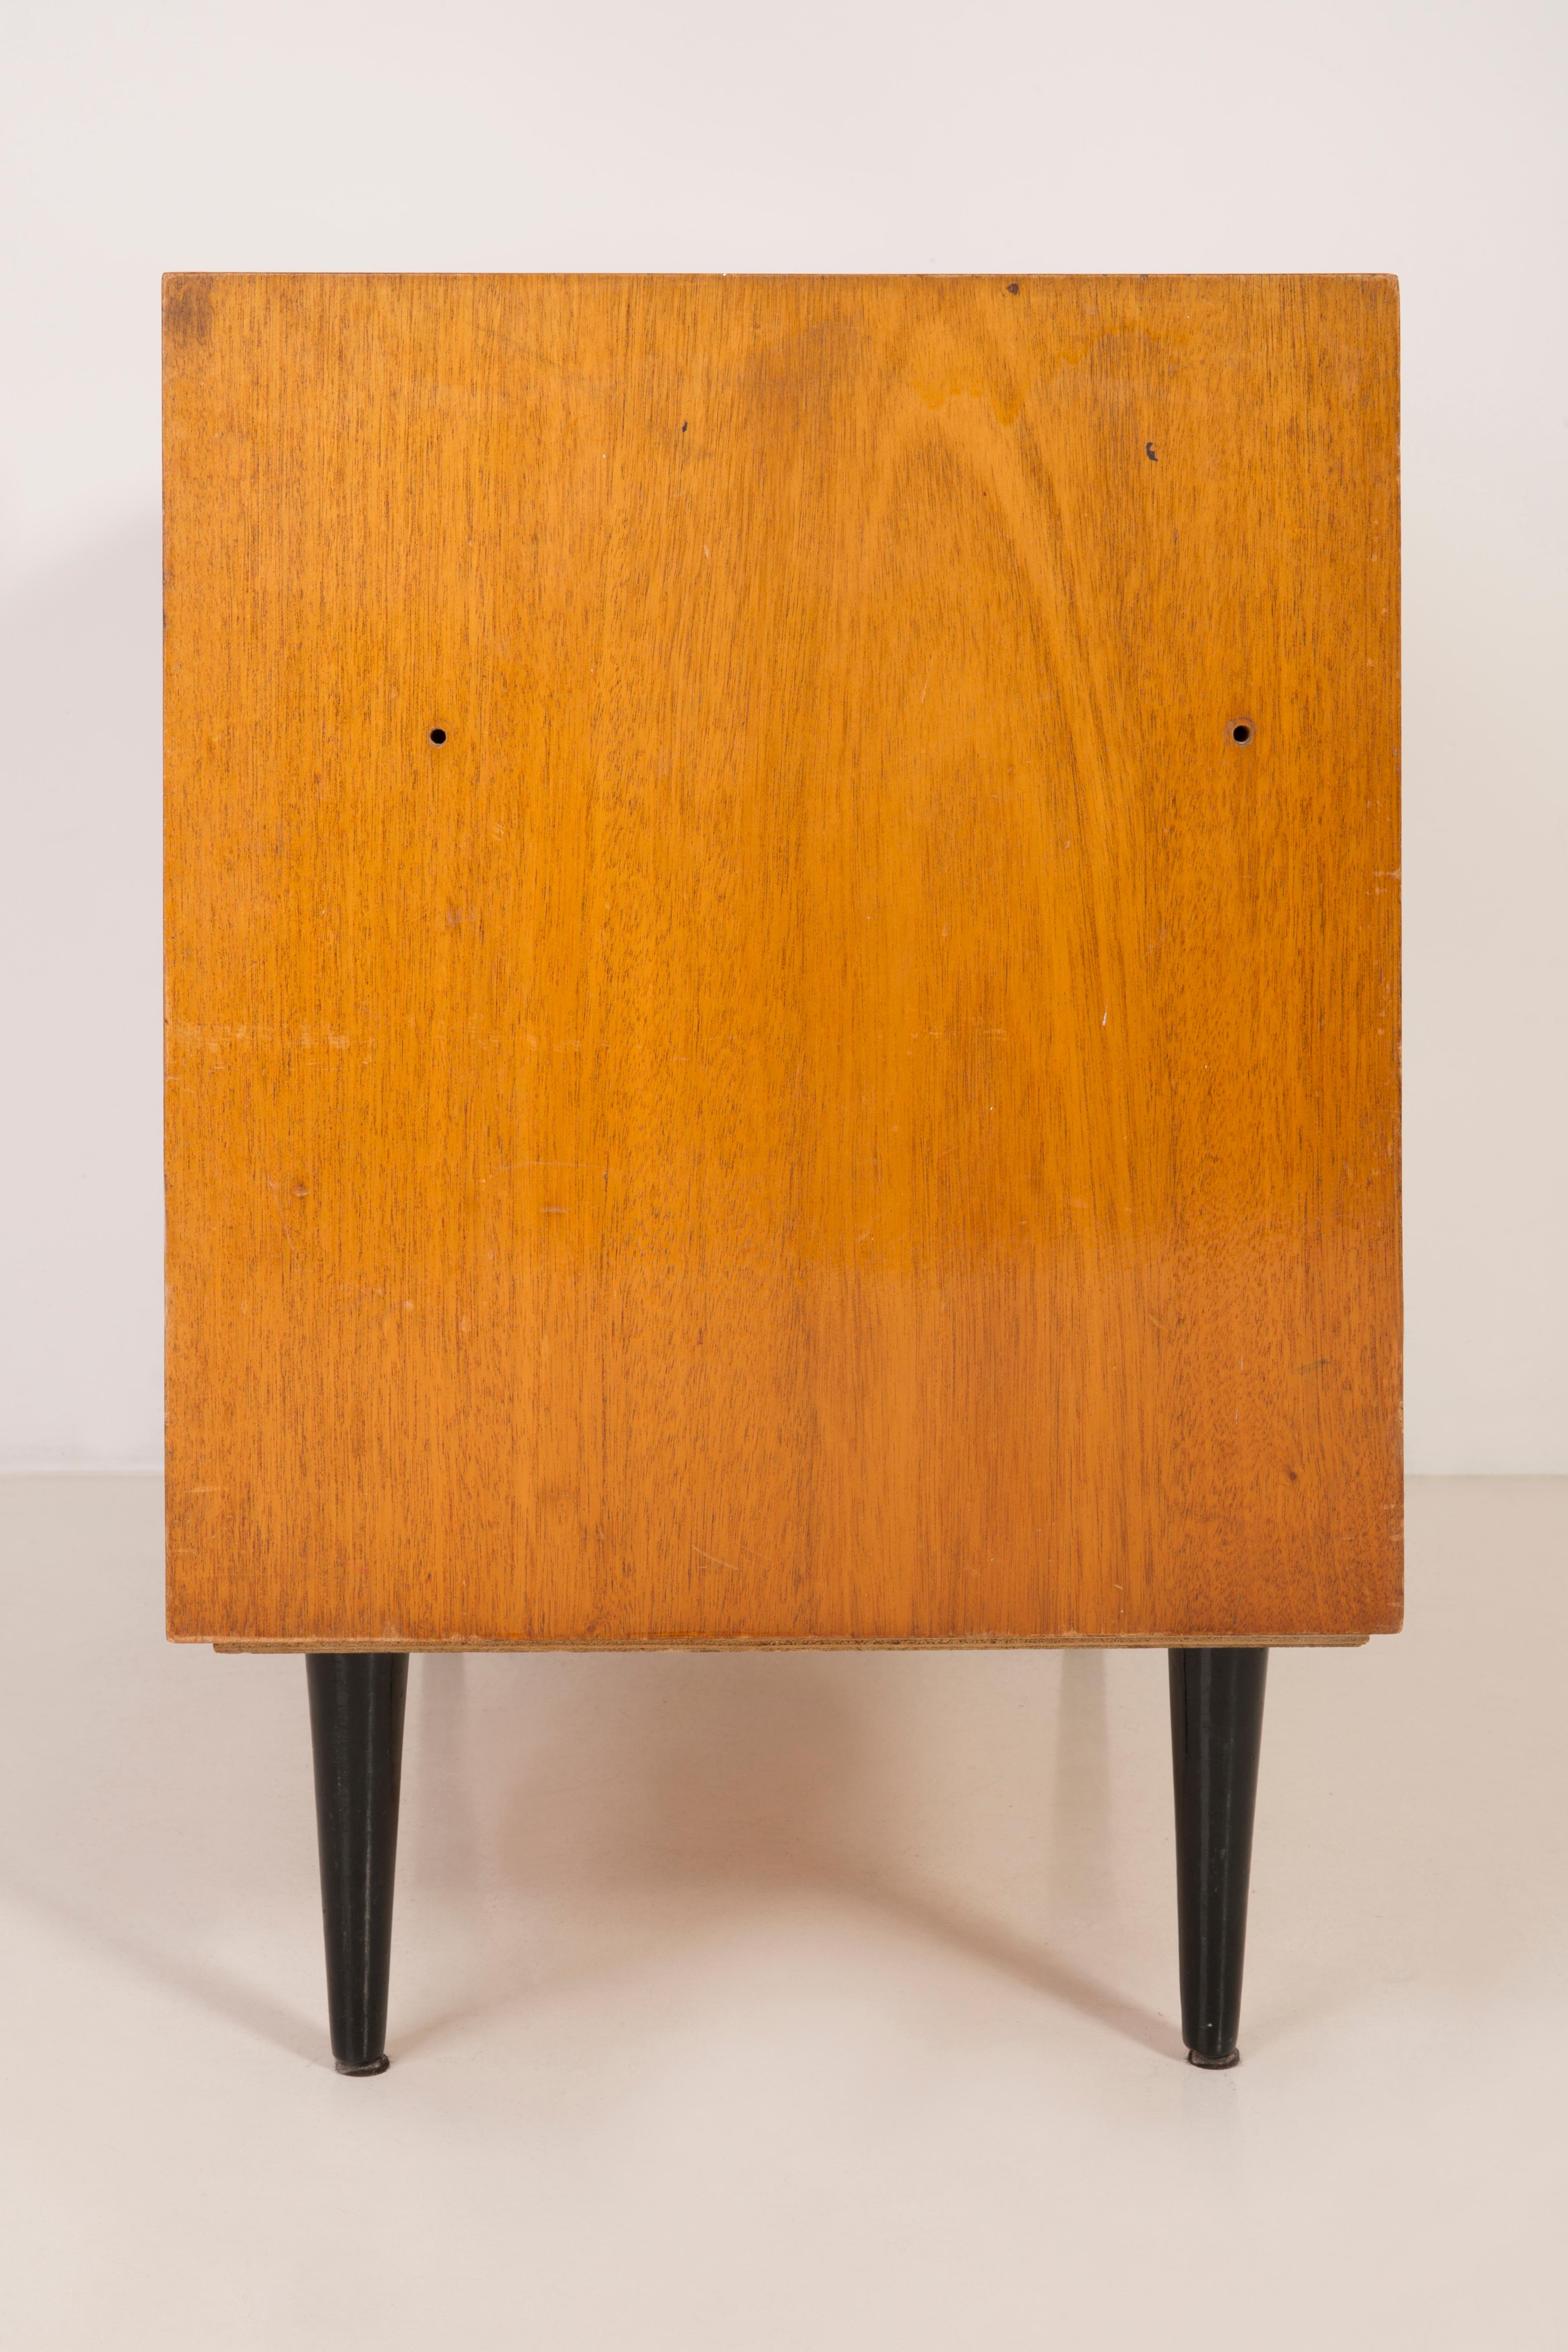 20th Century Set of Three Mid-Century Modern Vintage Sideboards, Wood, Poland, 1960s For Sale